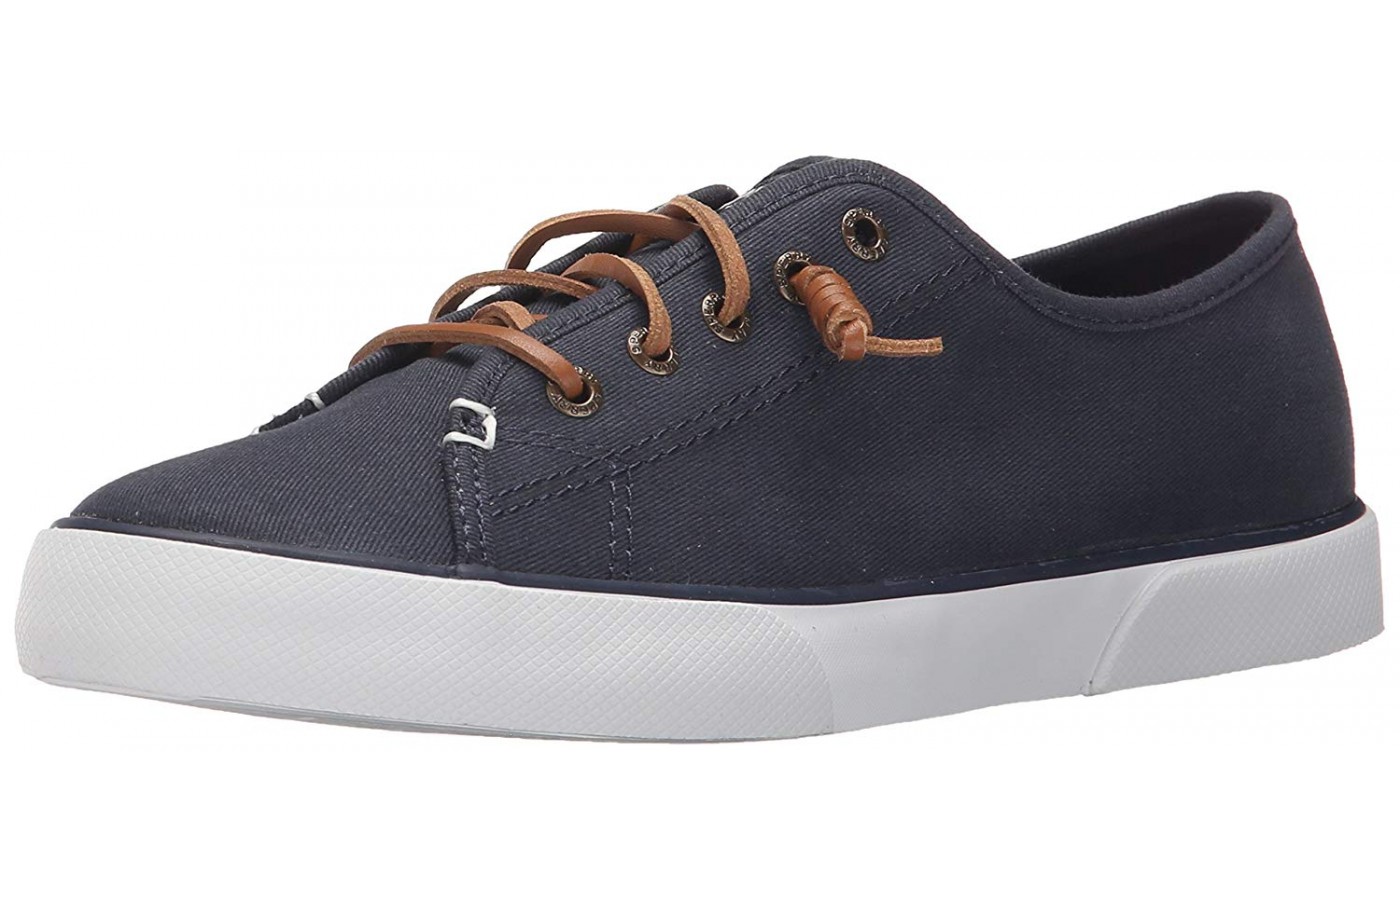 sperry shoes review